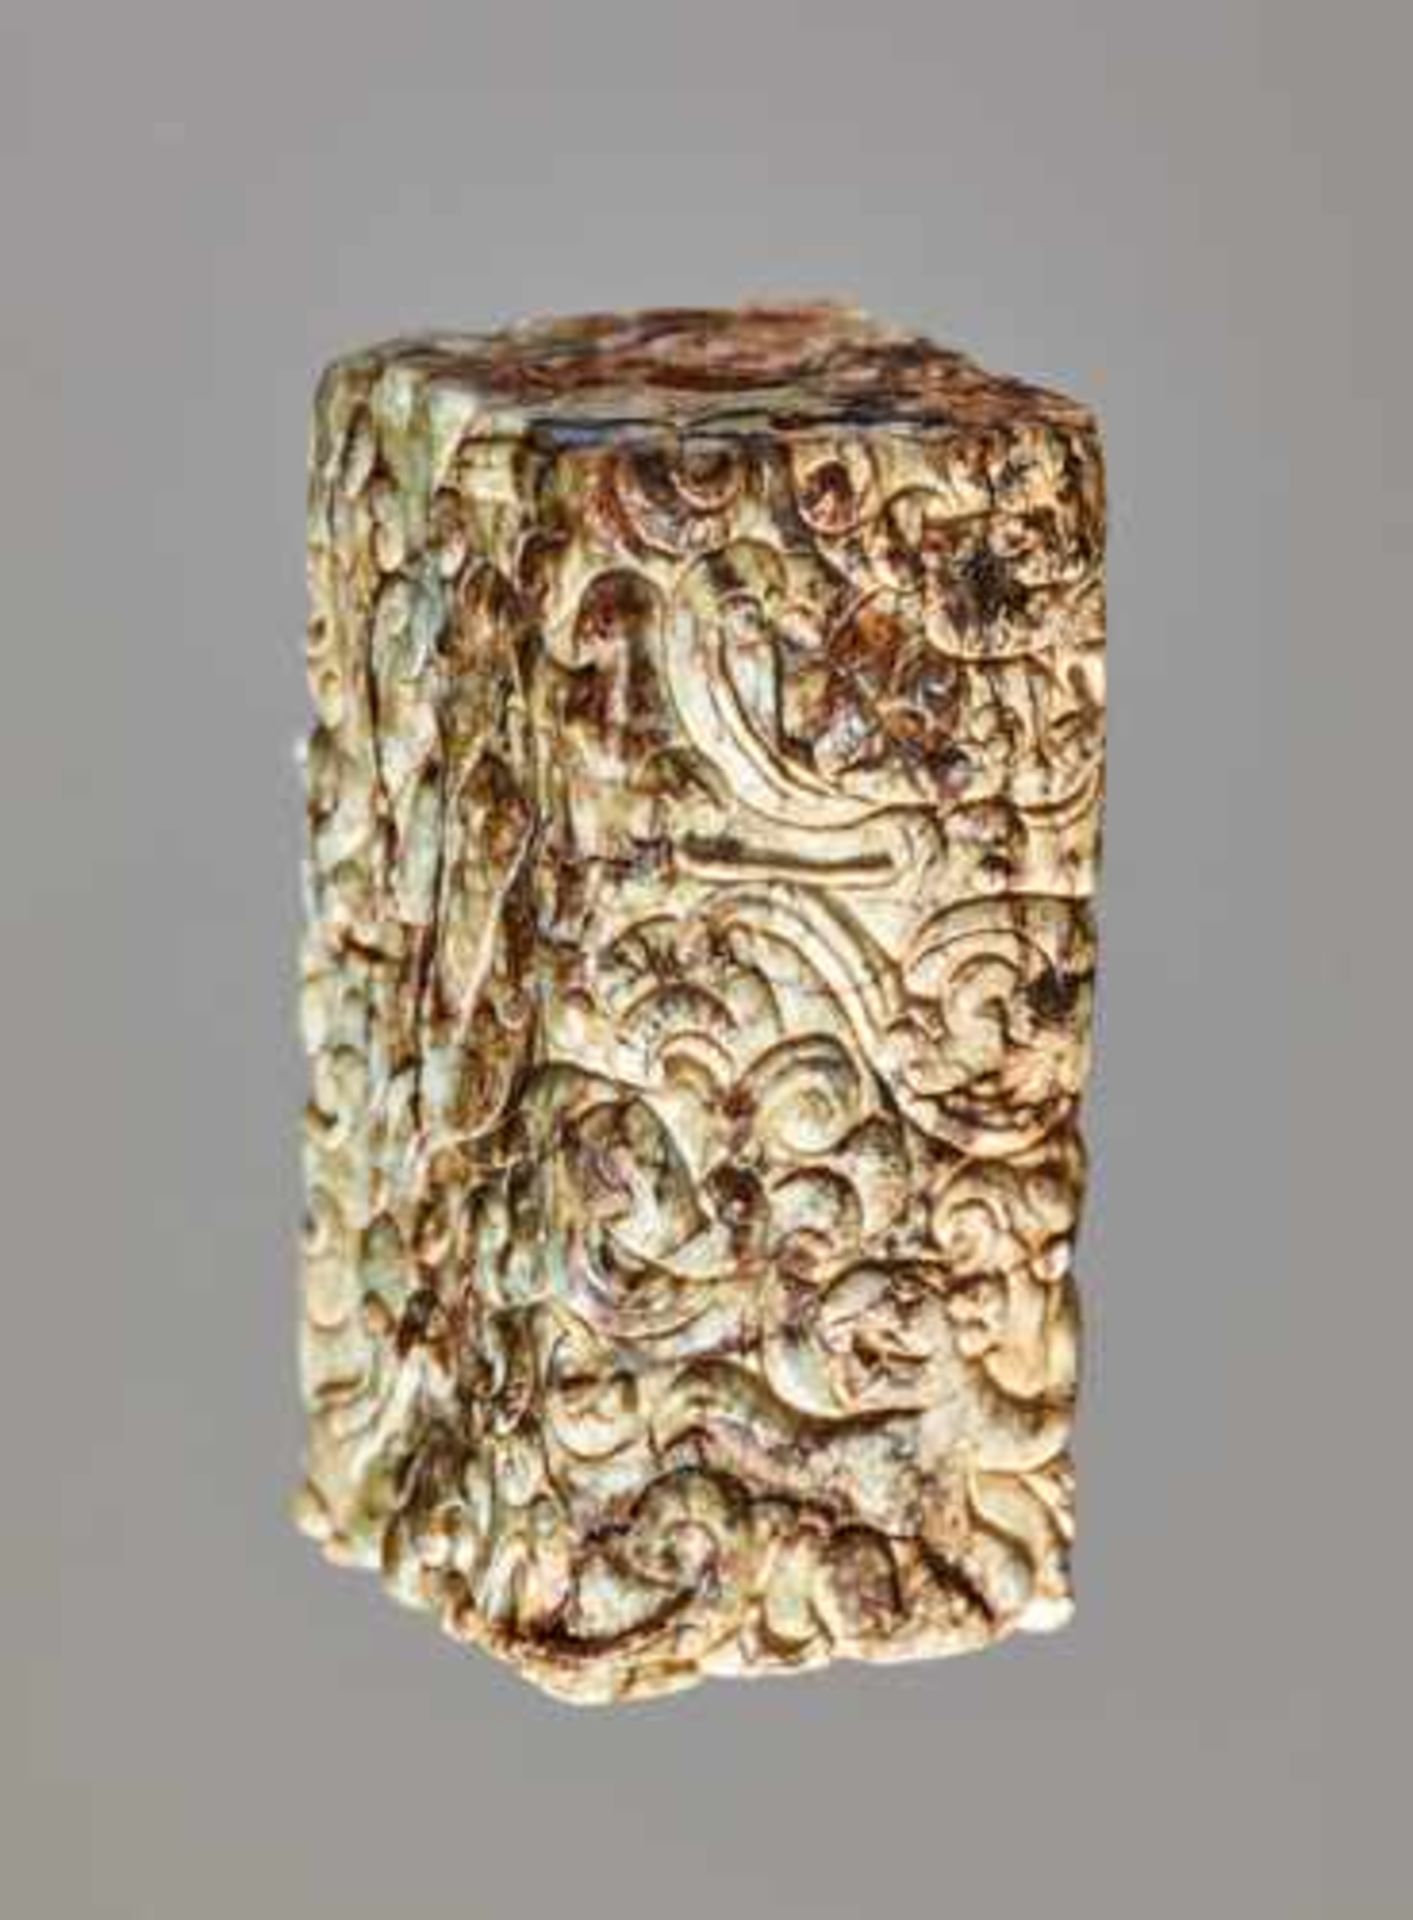 A RARE RECTANGULAR BEAD COVERED WITH AN INTRICATE PATTERN OF IMMORTALS AND MYTHICAL CREATURES - Image 6 of 13